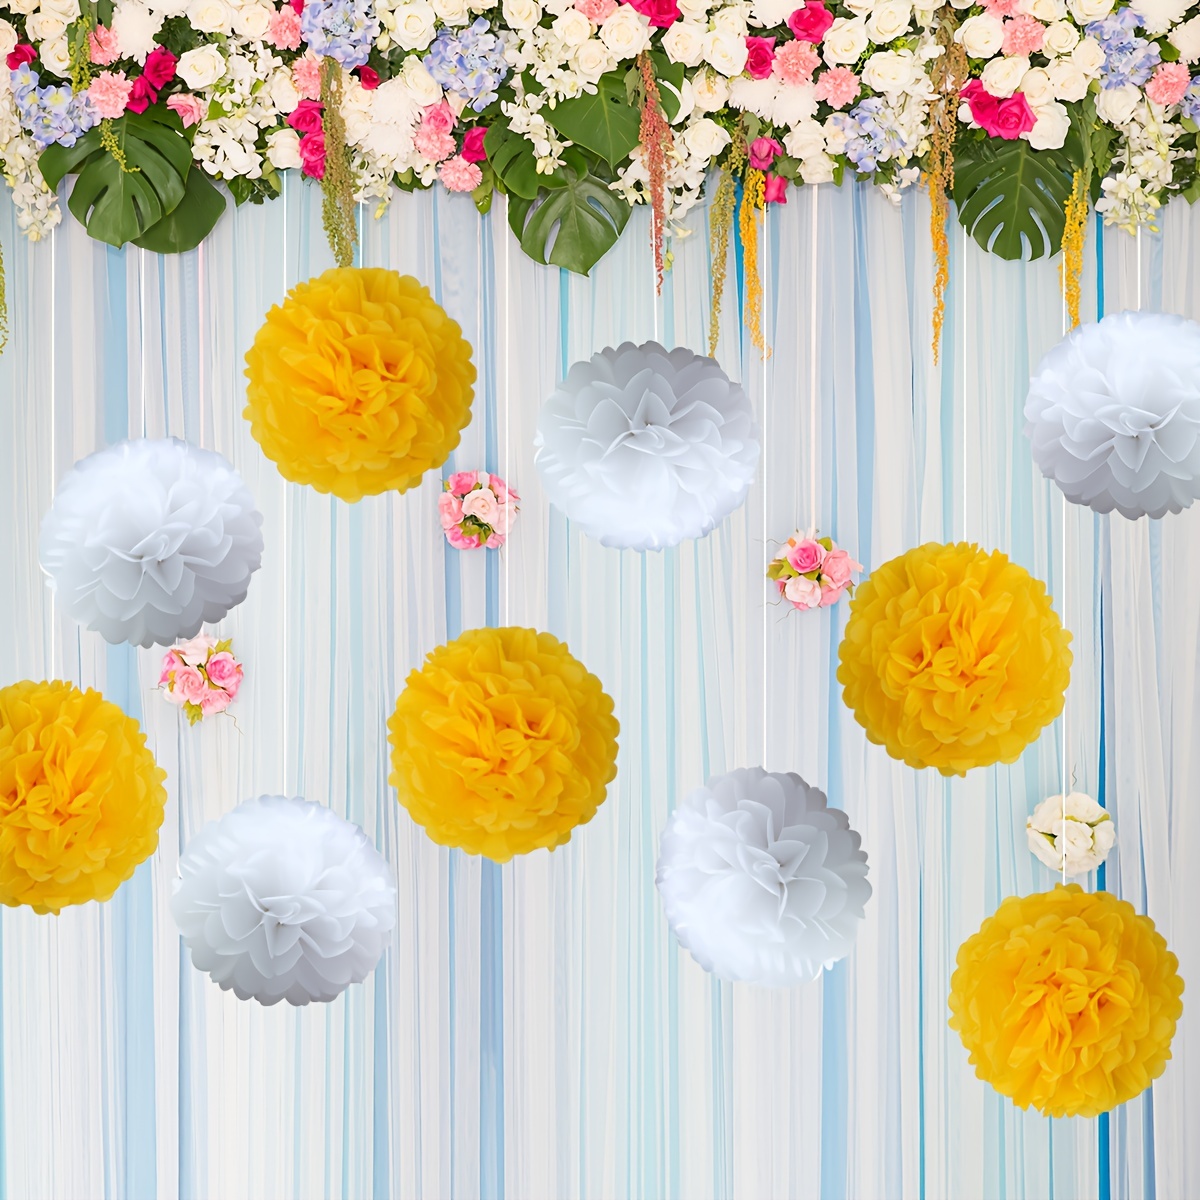 DIY Tissue Paper Pom Poms Flowers for Wedding Birthday Party Baby Shower  Decoration Handmade Gold White Haning Paper Ball Decor - AliExpress